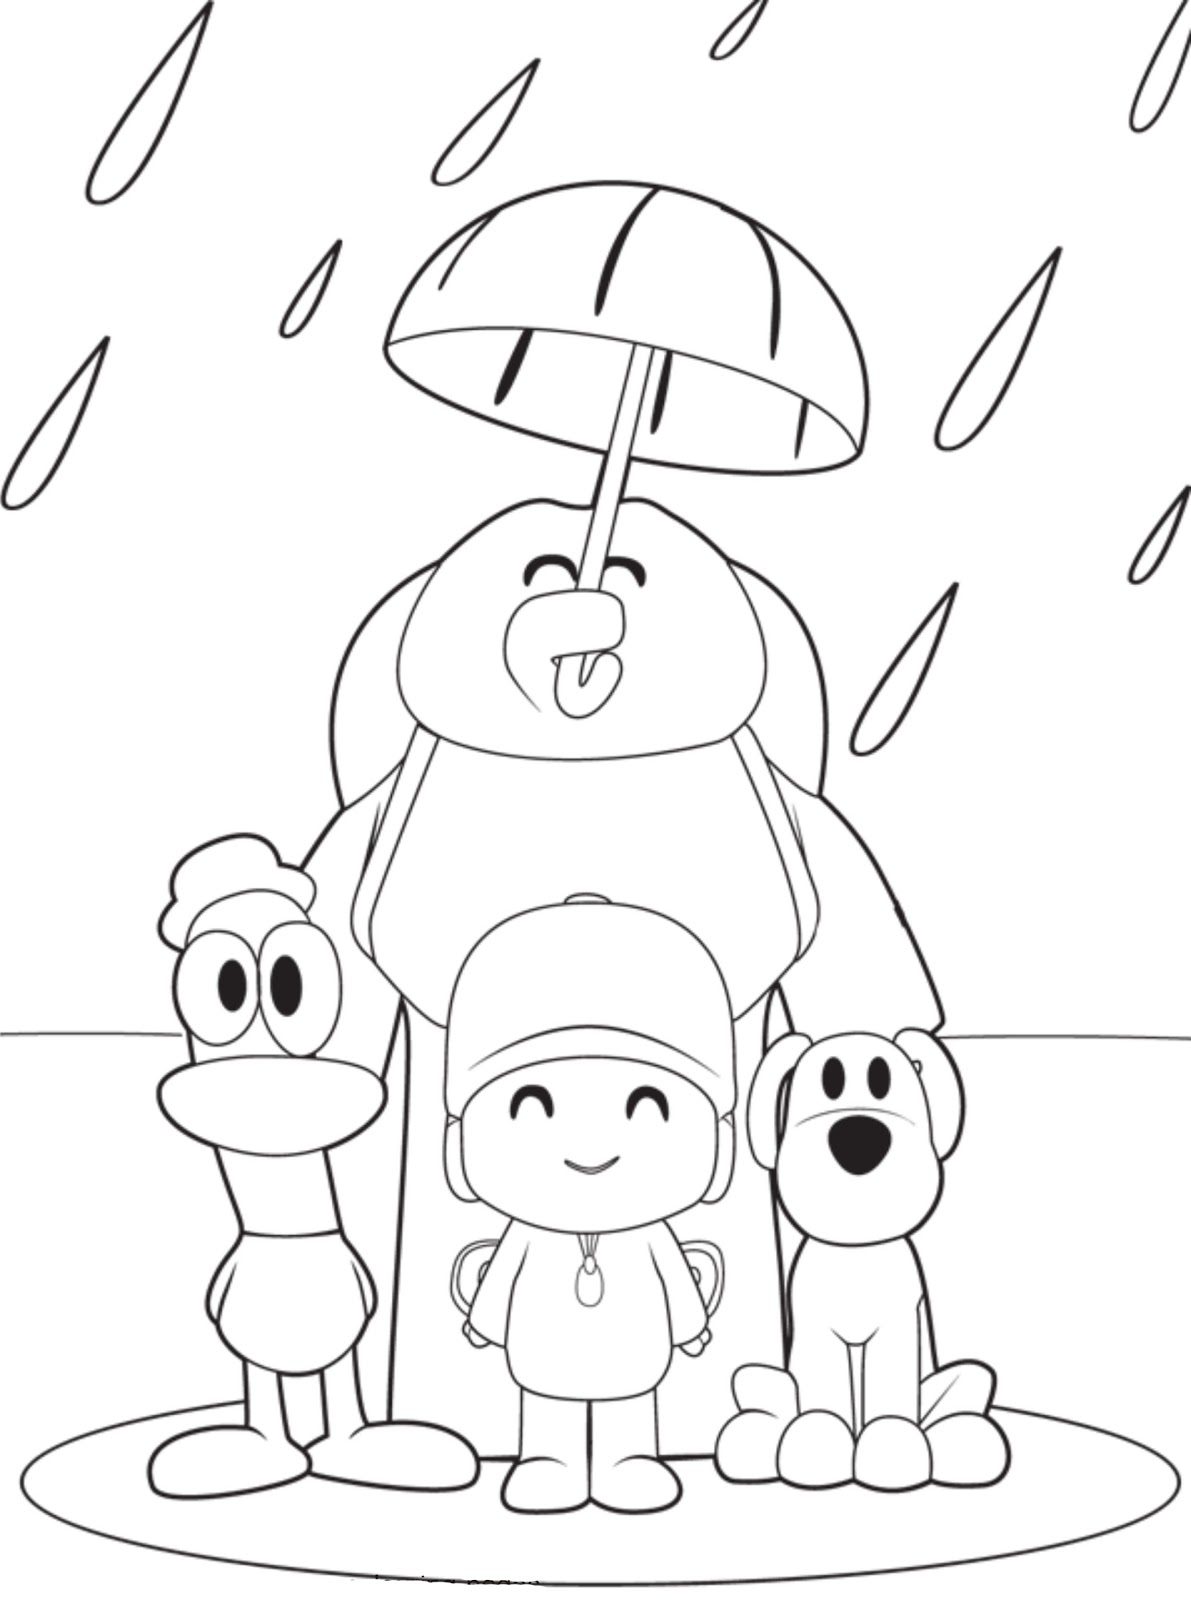 Pocoyo Coloring Pages ~ Free Printable Coloring Pages - Cool Coloring Pages